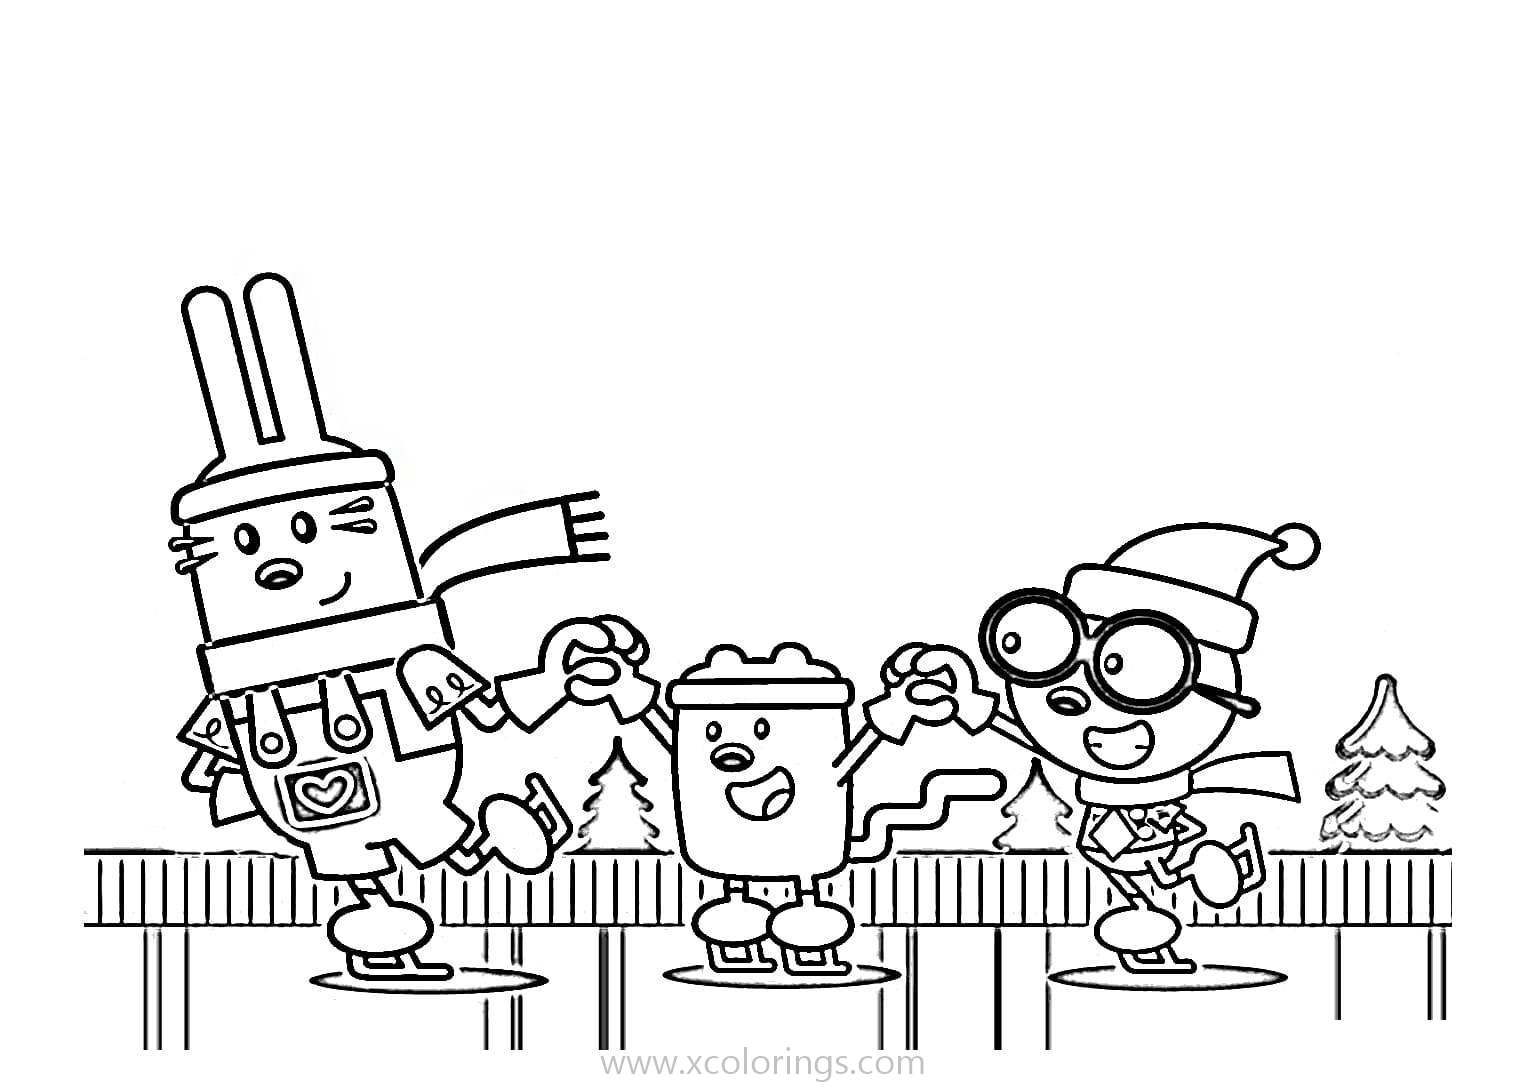 Free Wow Wow Wubbzy Coloring Pages Skating printable